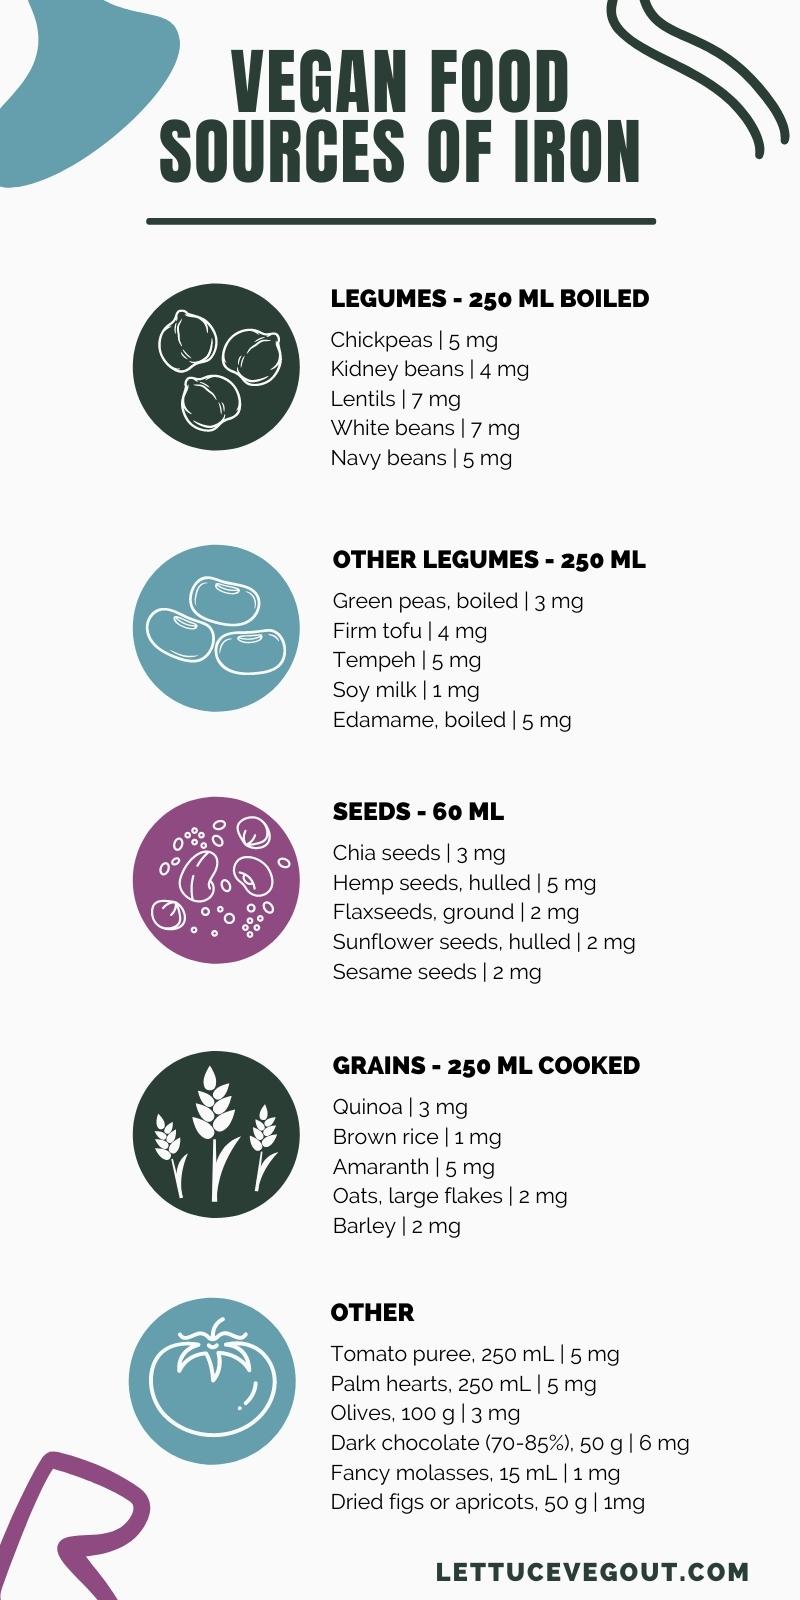 Infographic with a list of plant-based foods and their iron content.